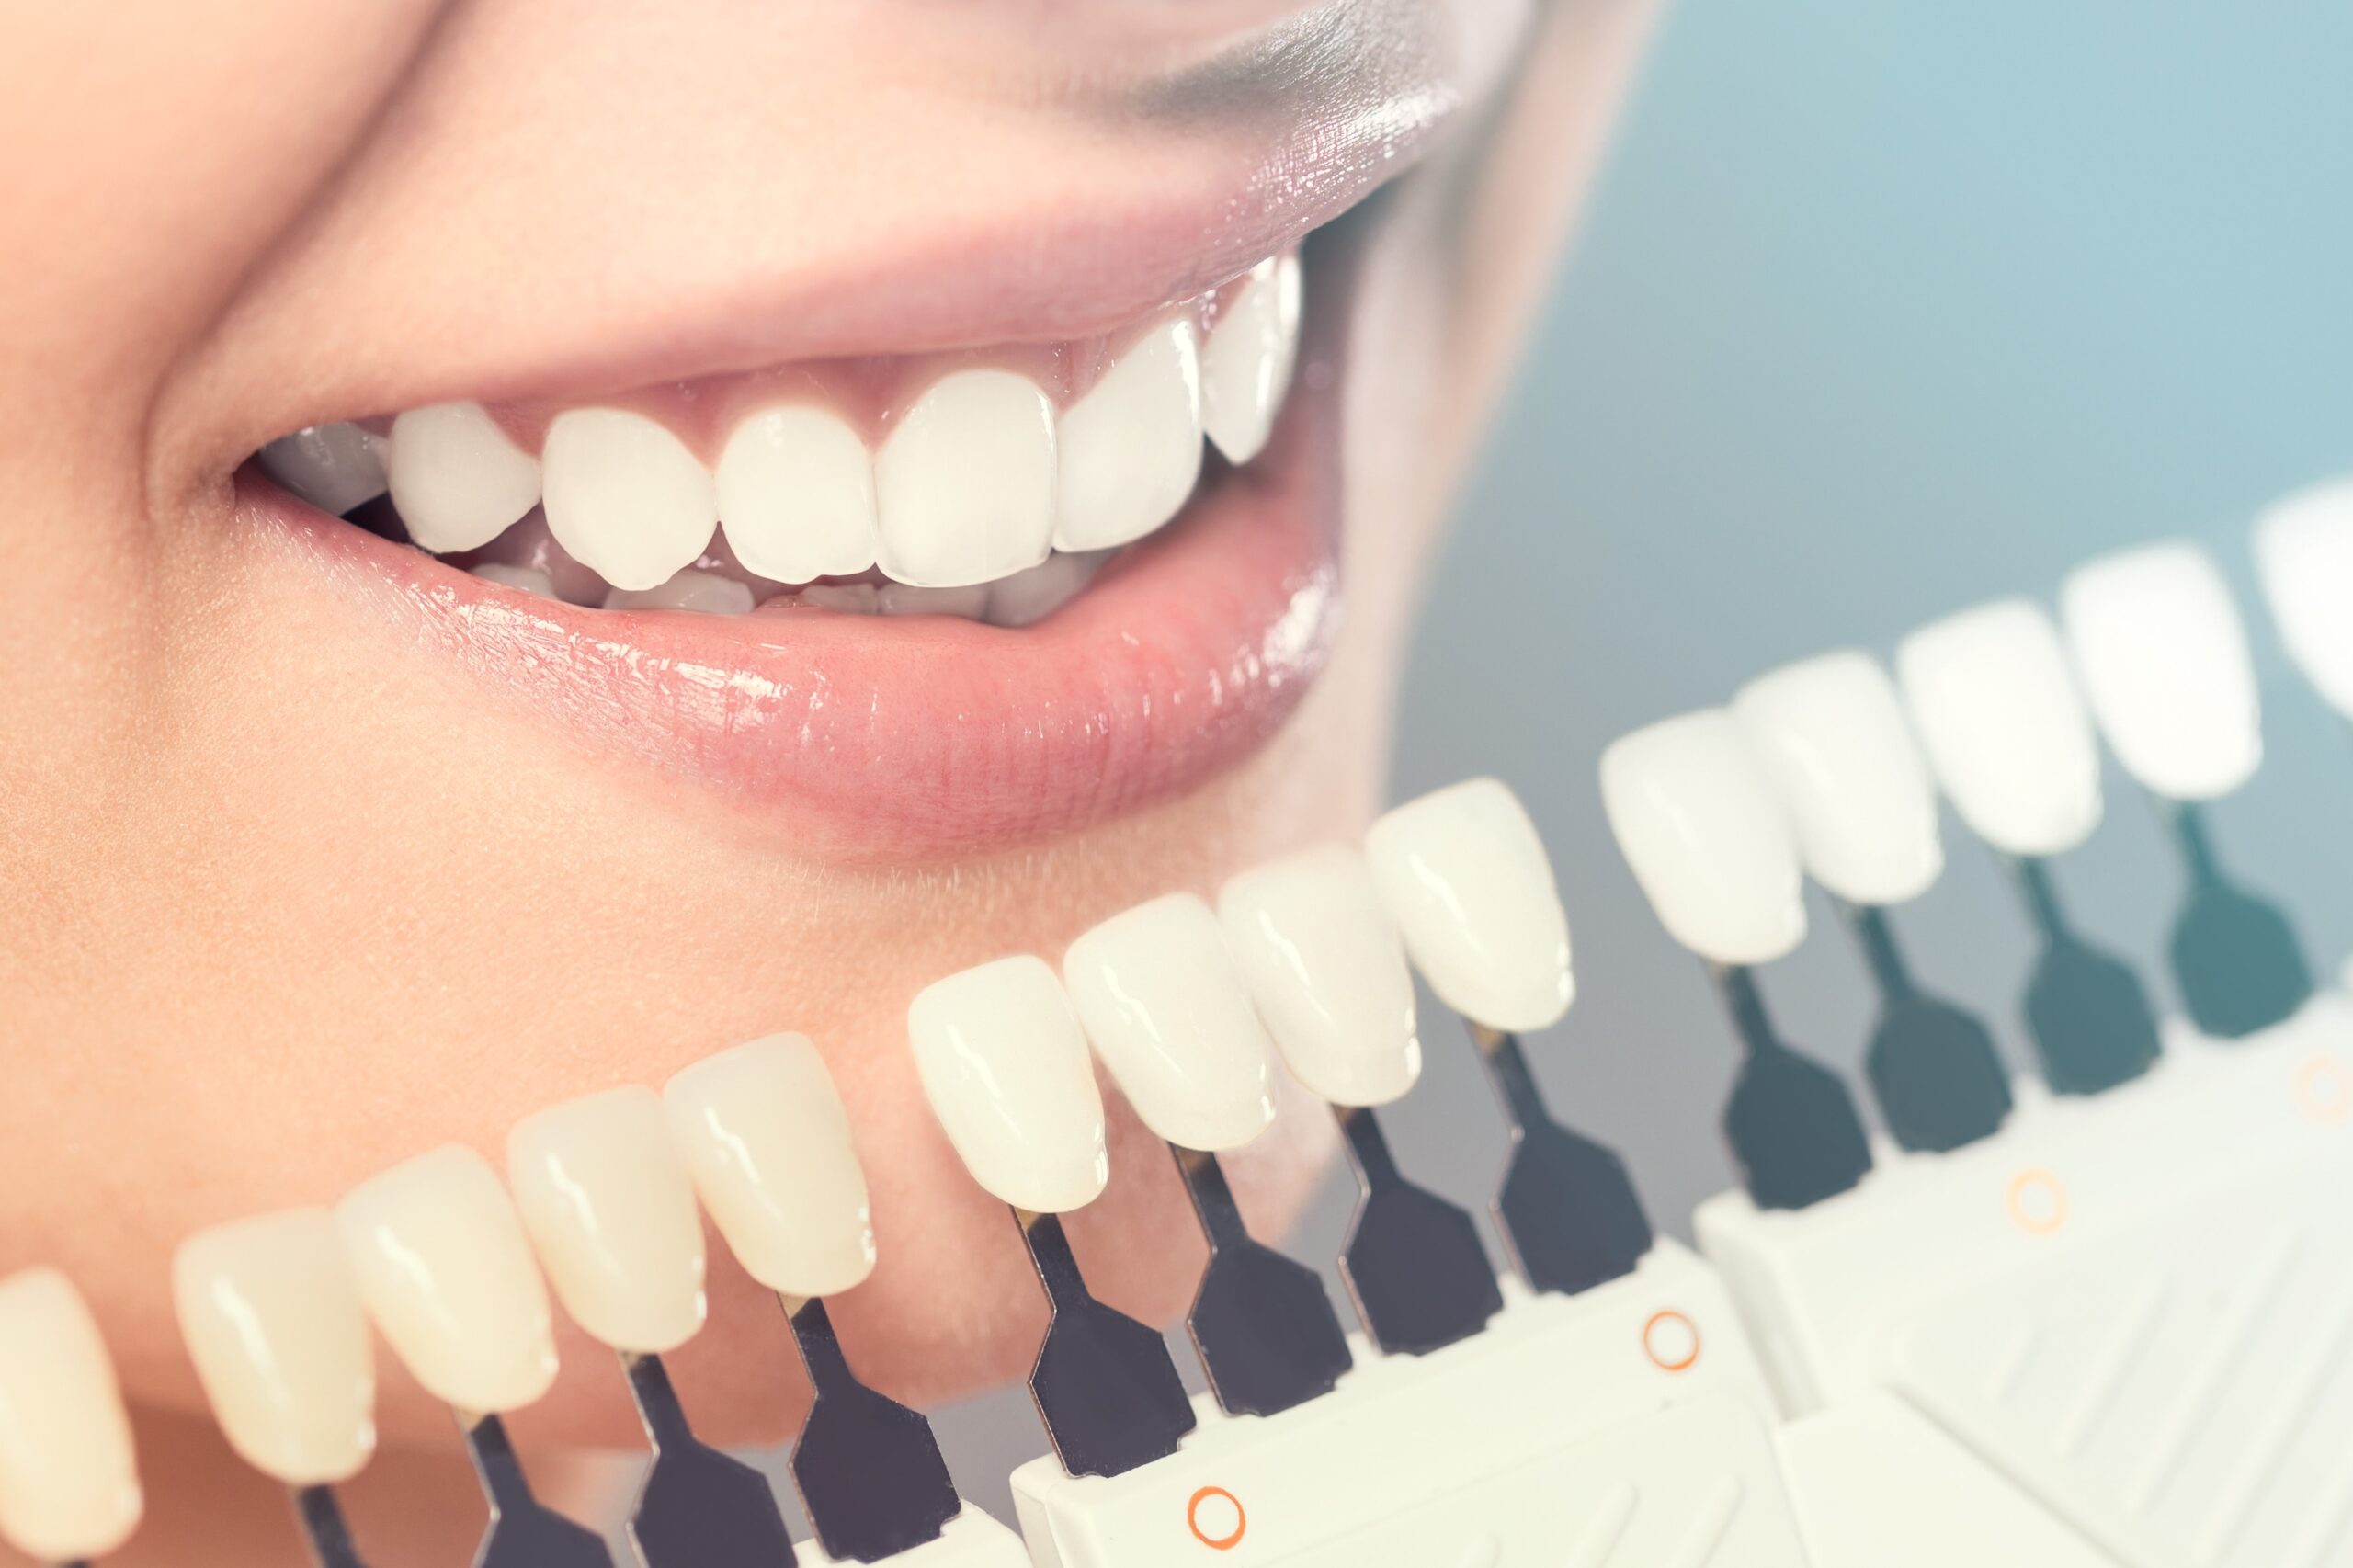 How Does Cosmetic Dentistry Help You Improve Your Smile?